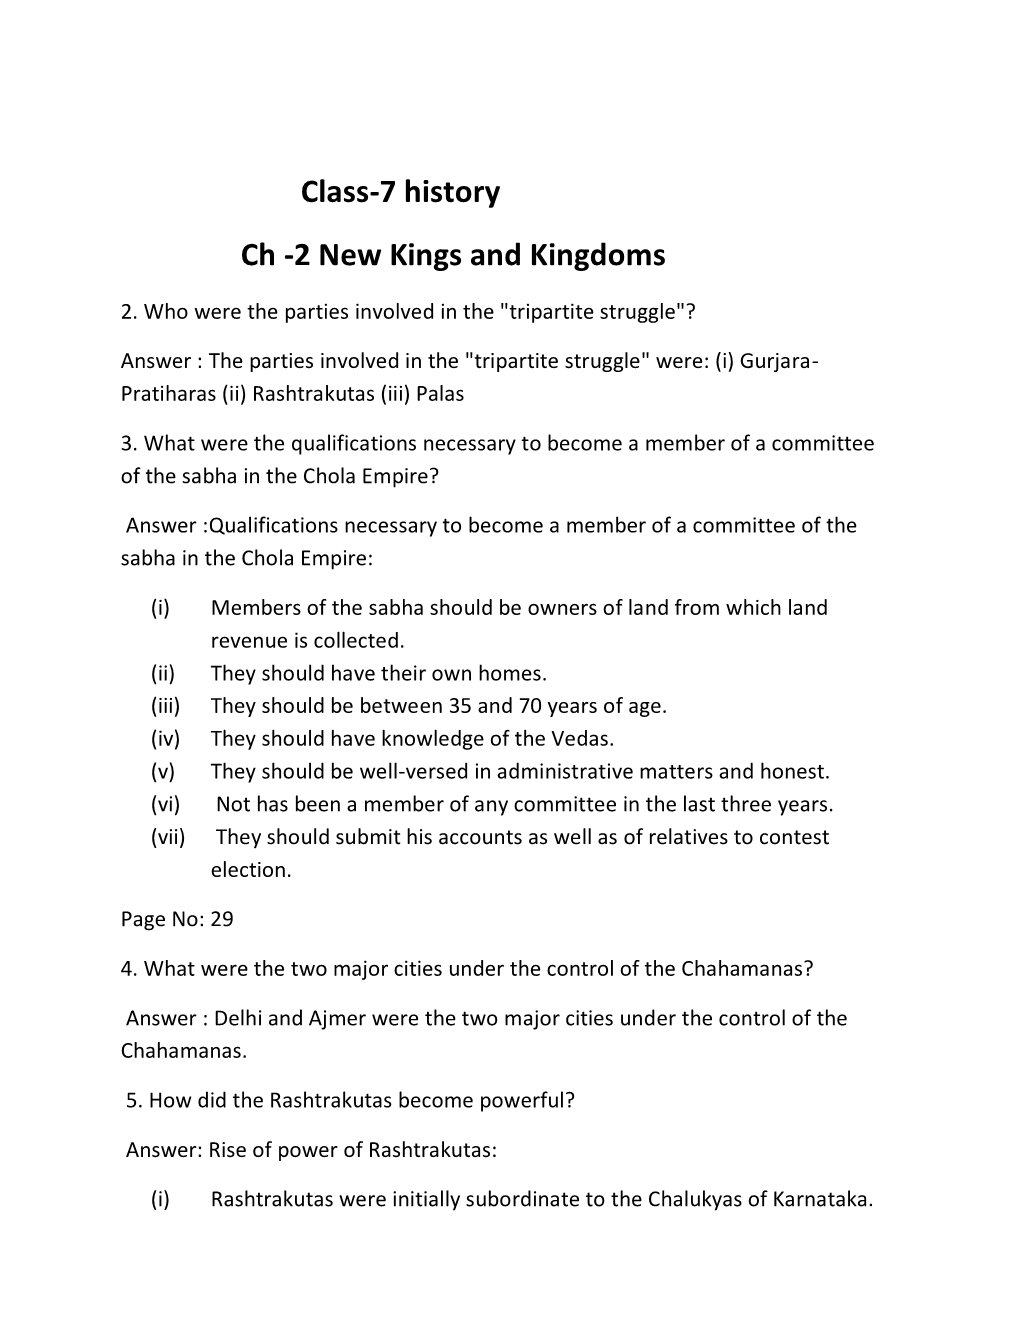 Class-7 History Ch -2 New Kings and Kingdoms